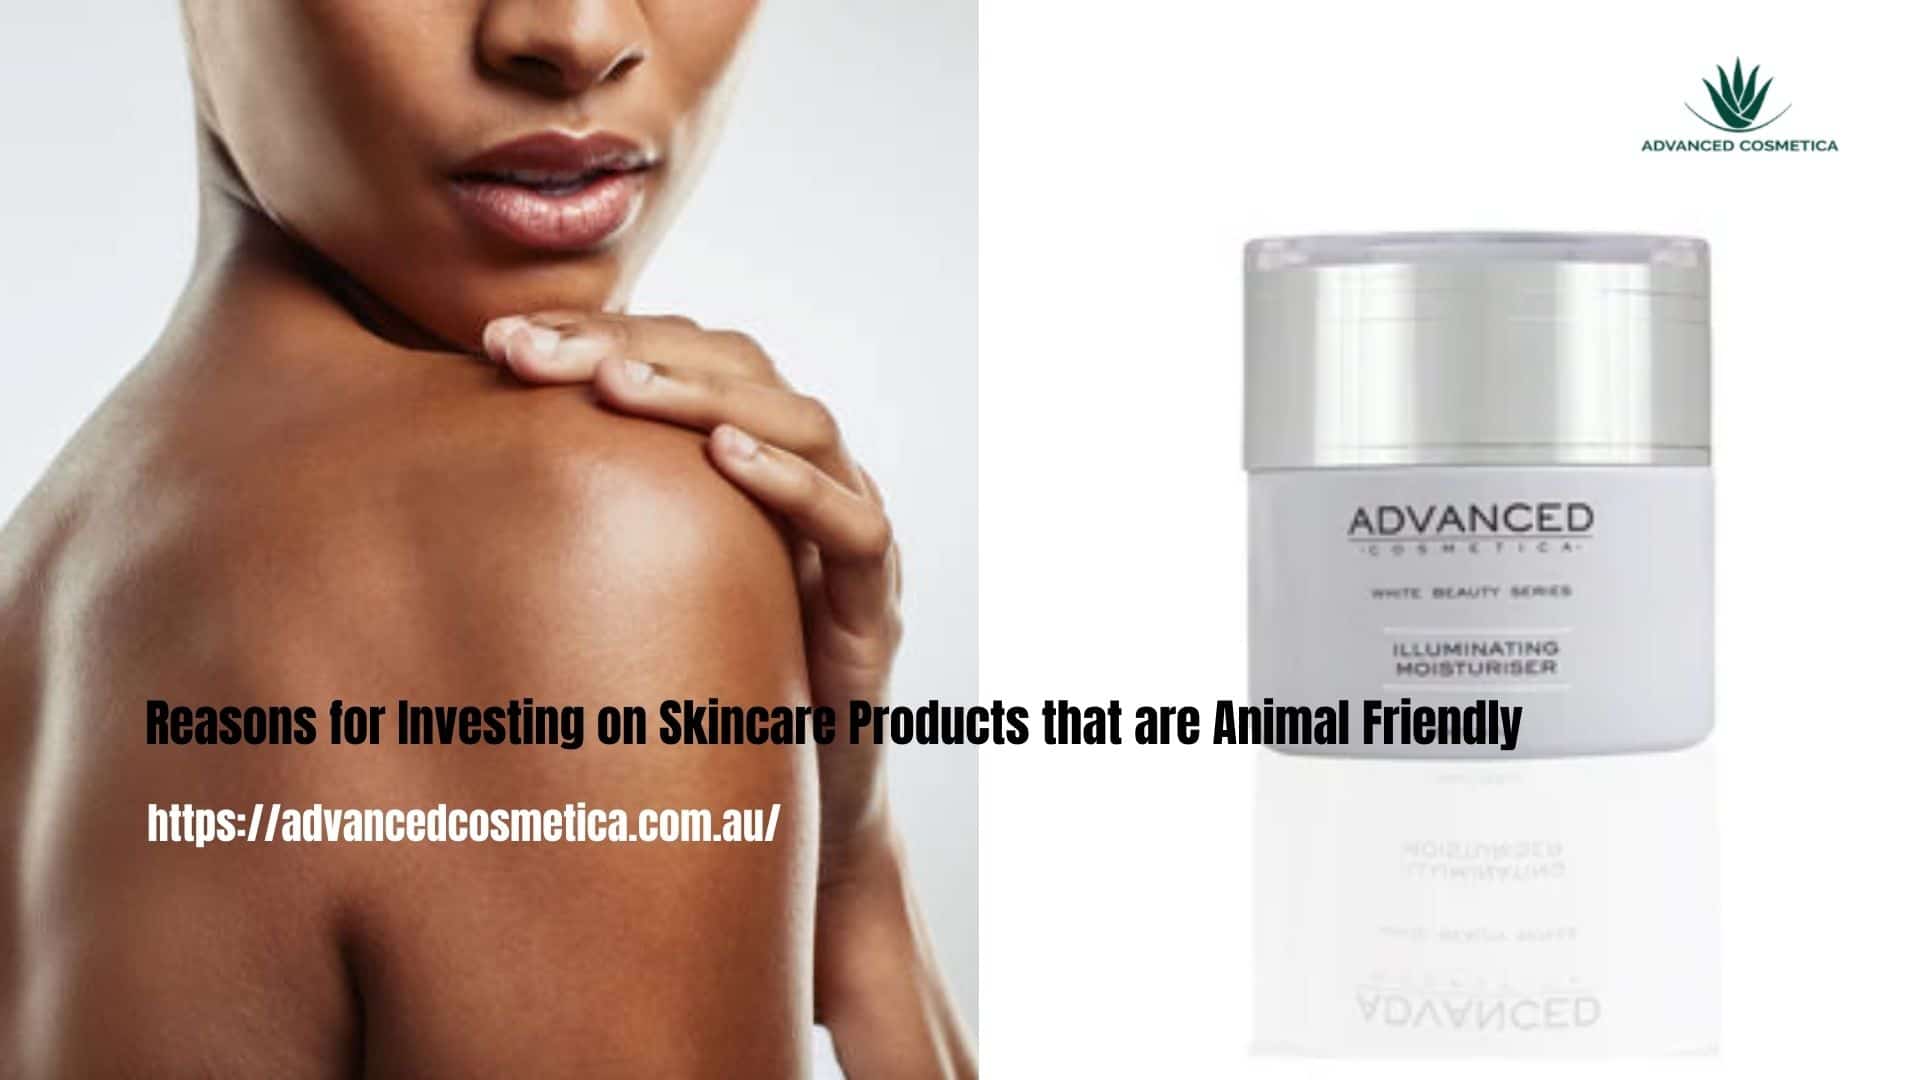 Reasons for Investing on Skincare Products that are Animal-6c51e954